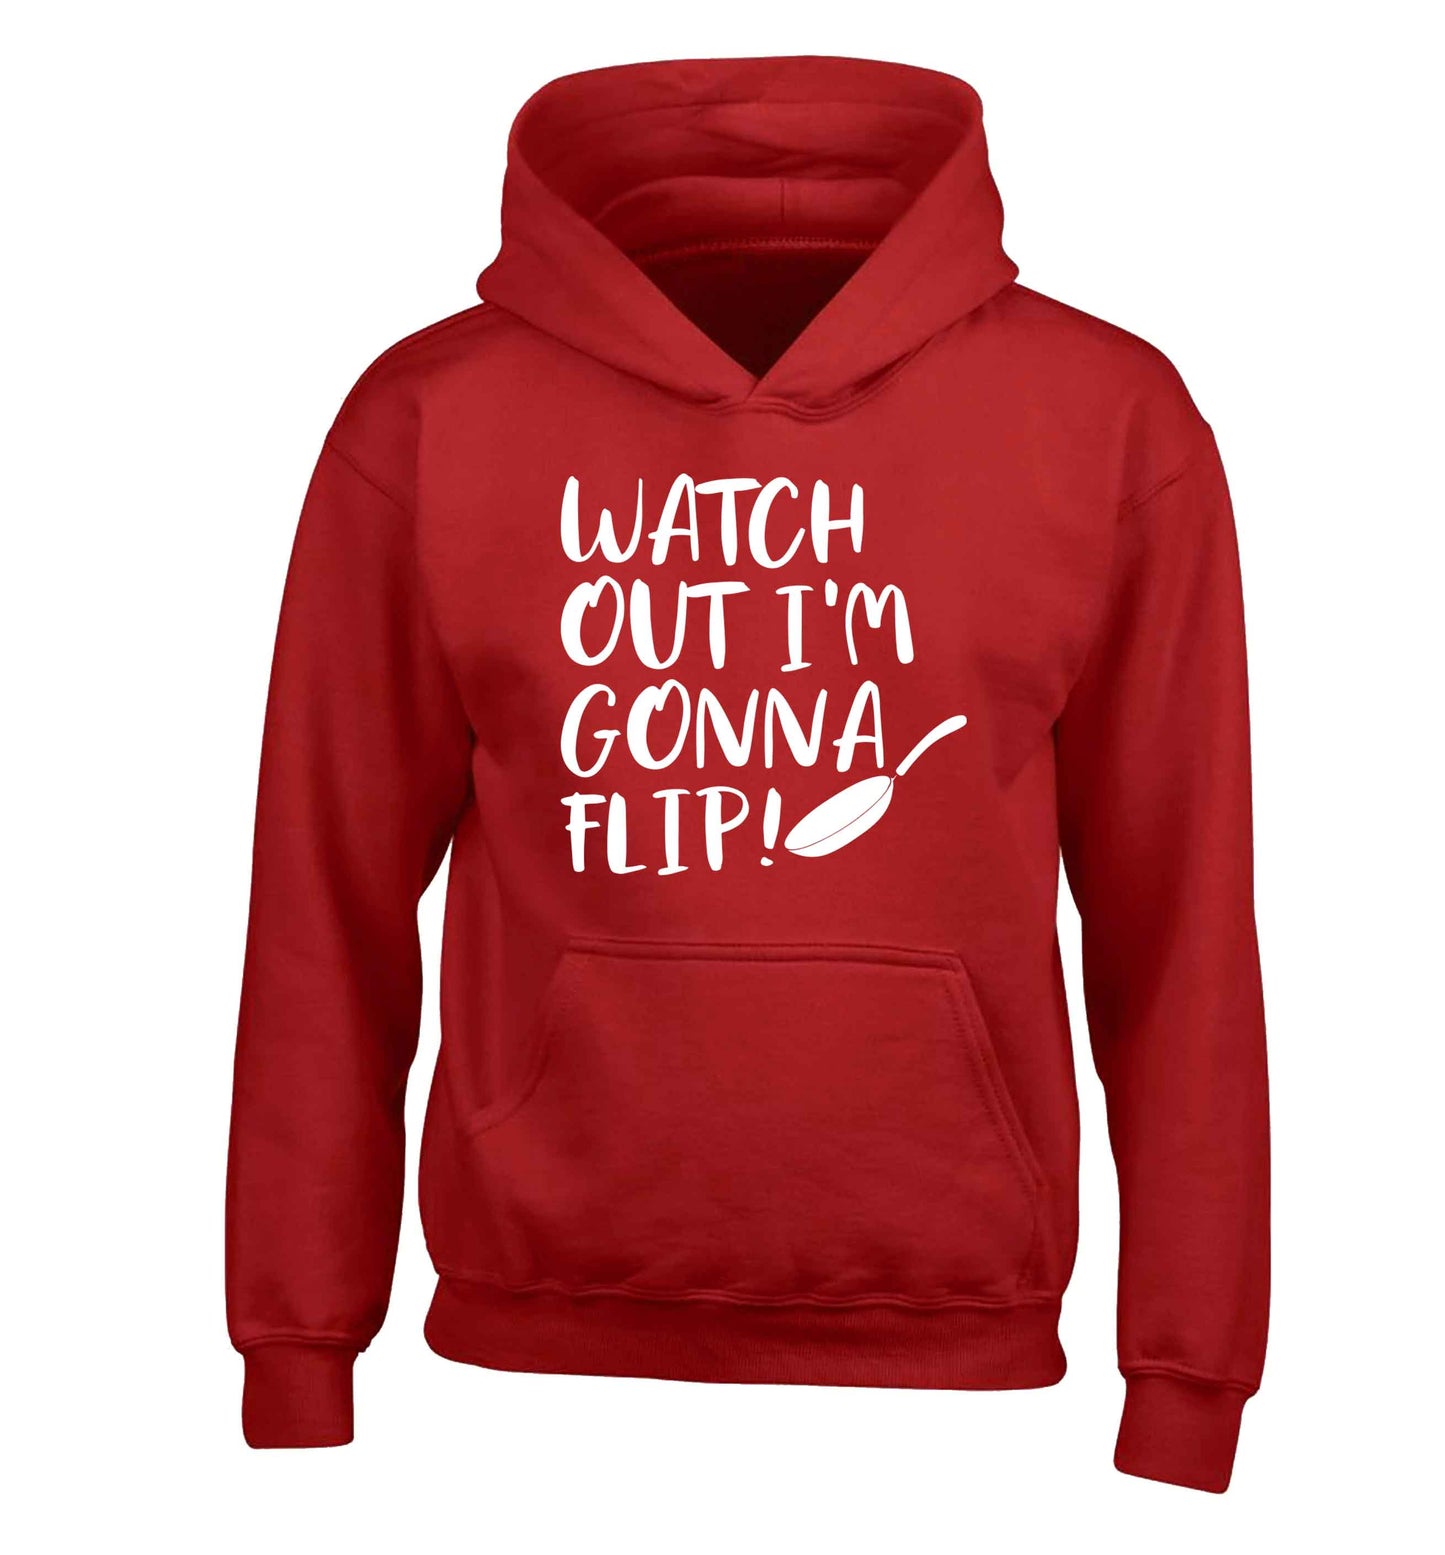 Watch out I'm gonna flip! children's red hoodie 12-13 Years